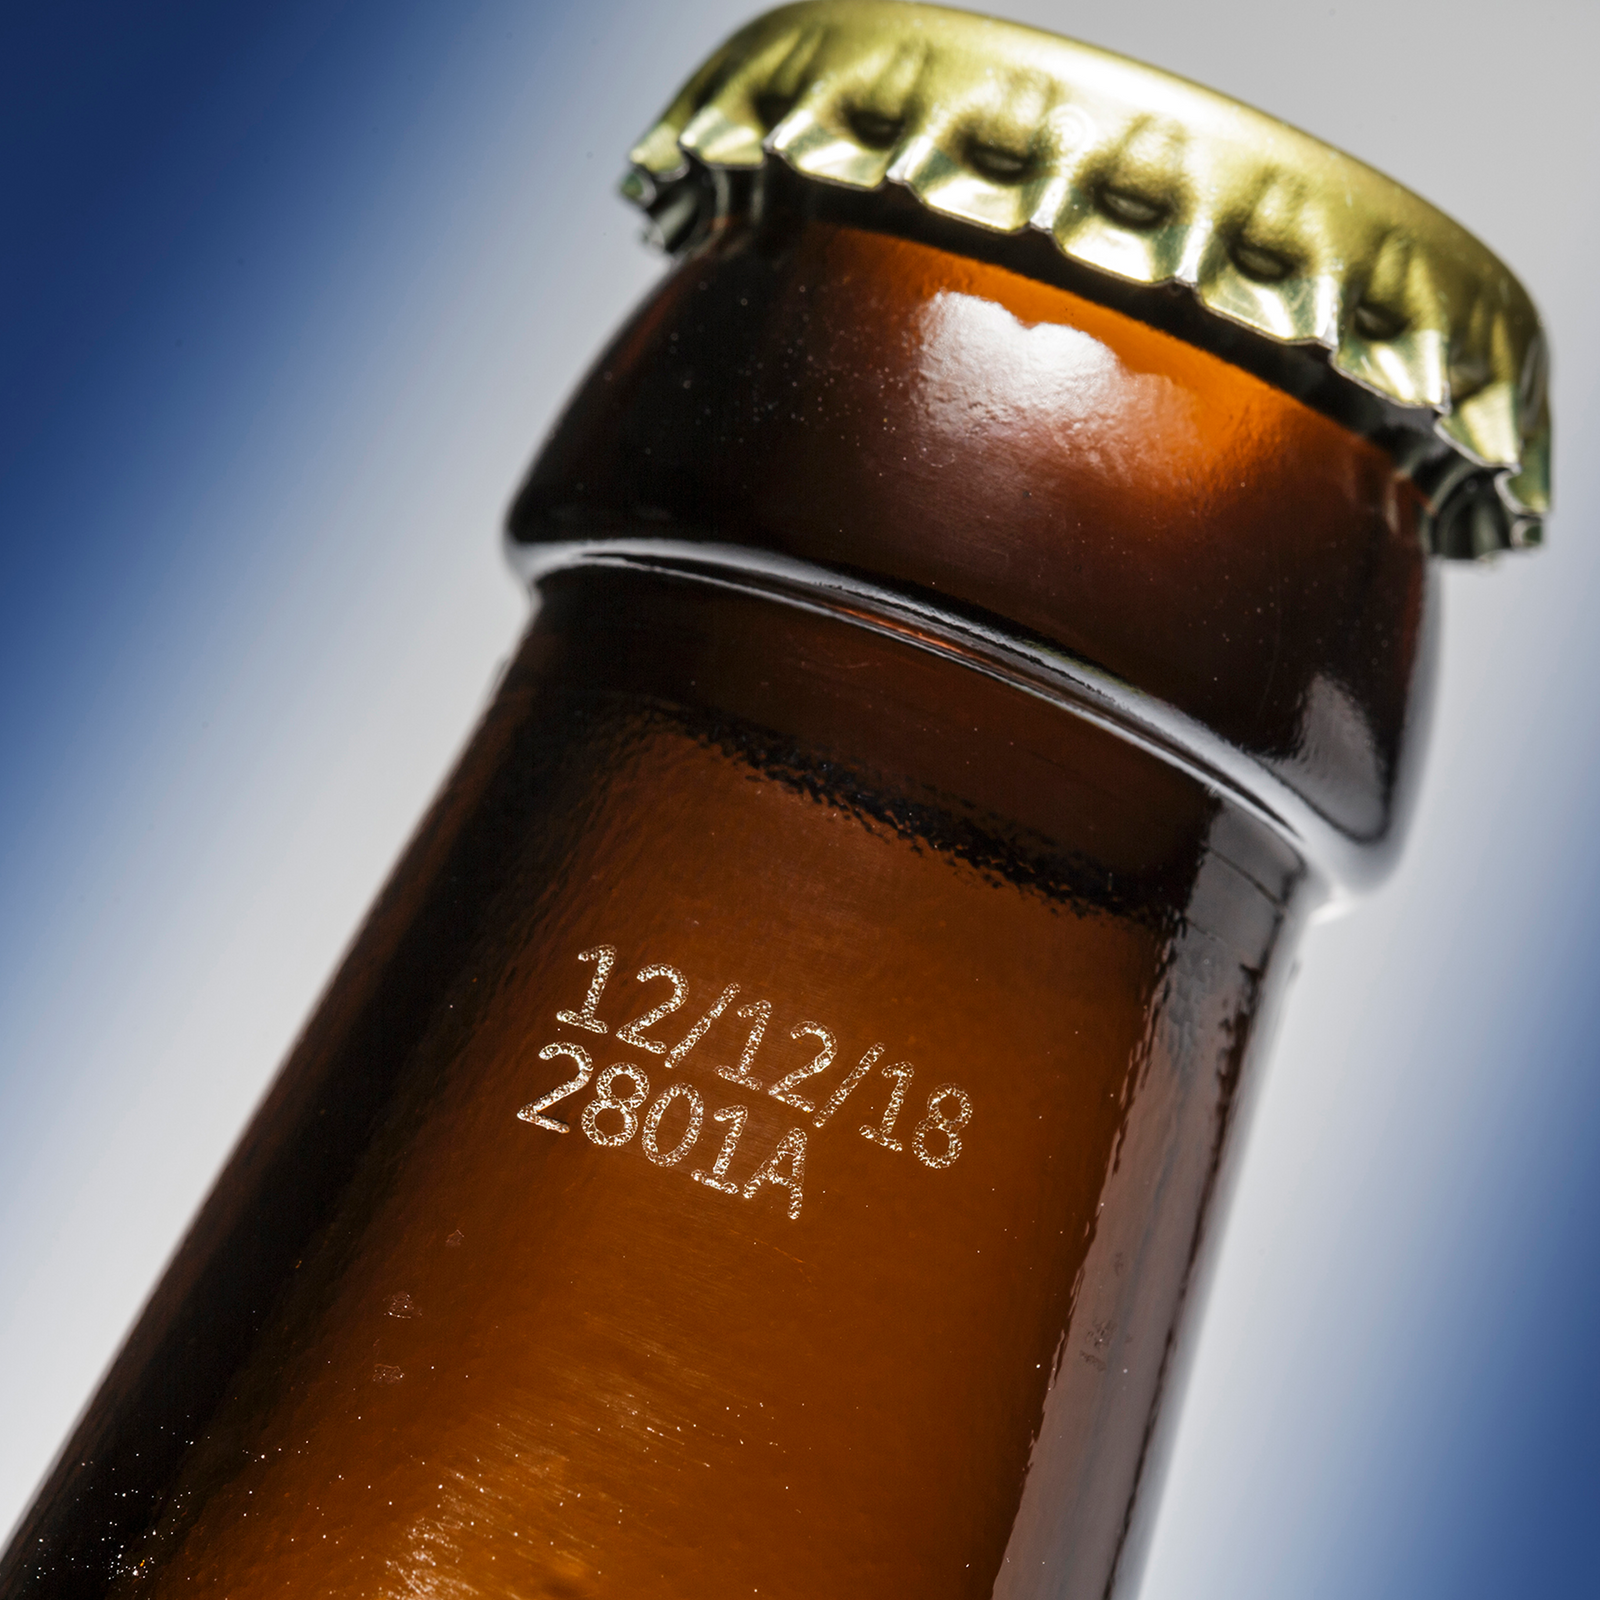 Code marked on a glass bottle done by a CSL60 LINX laser coder